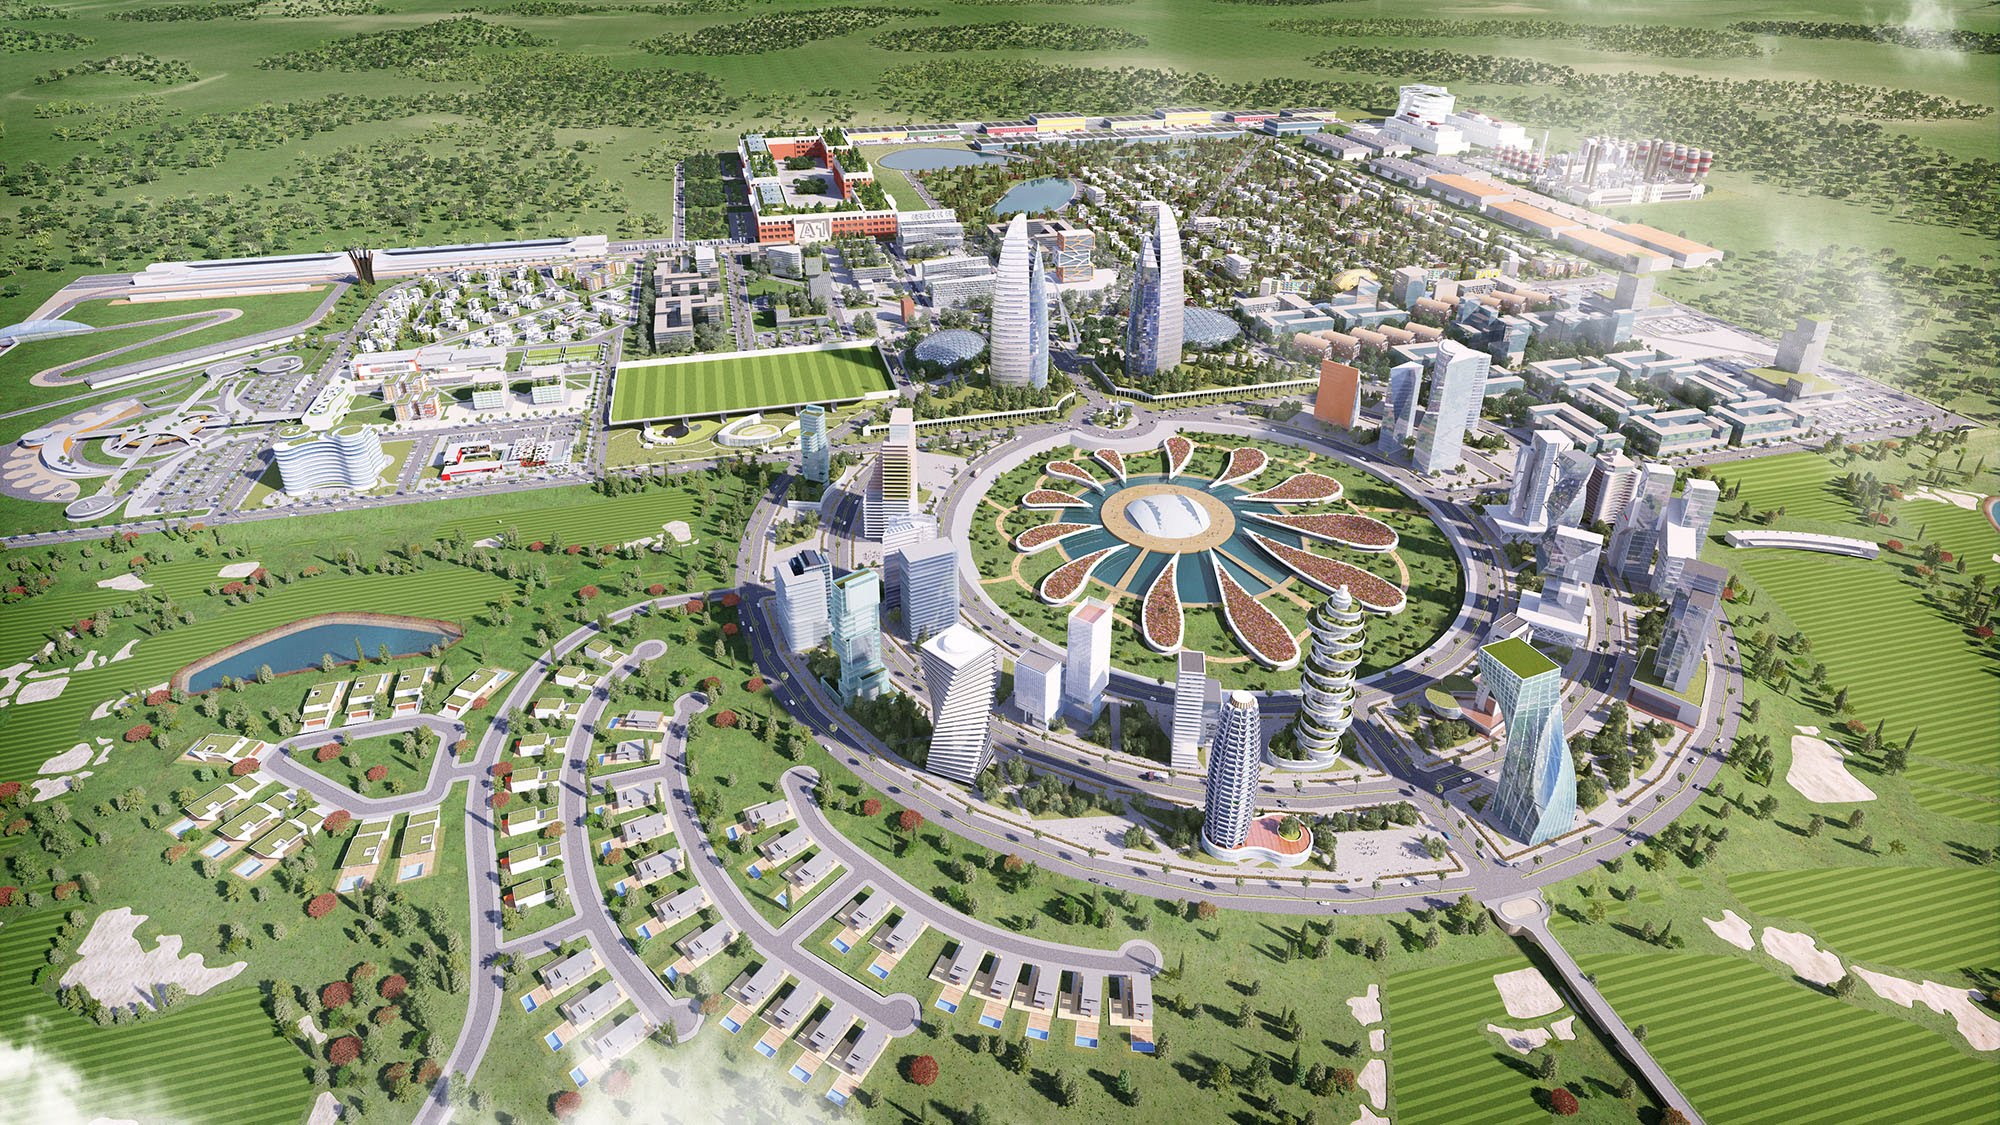 World Class Team to Build this New African City in Ghana - AB2020